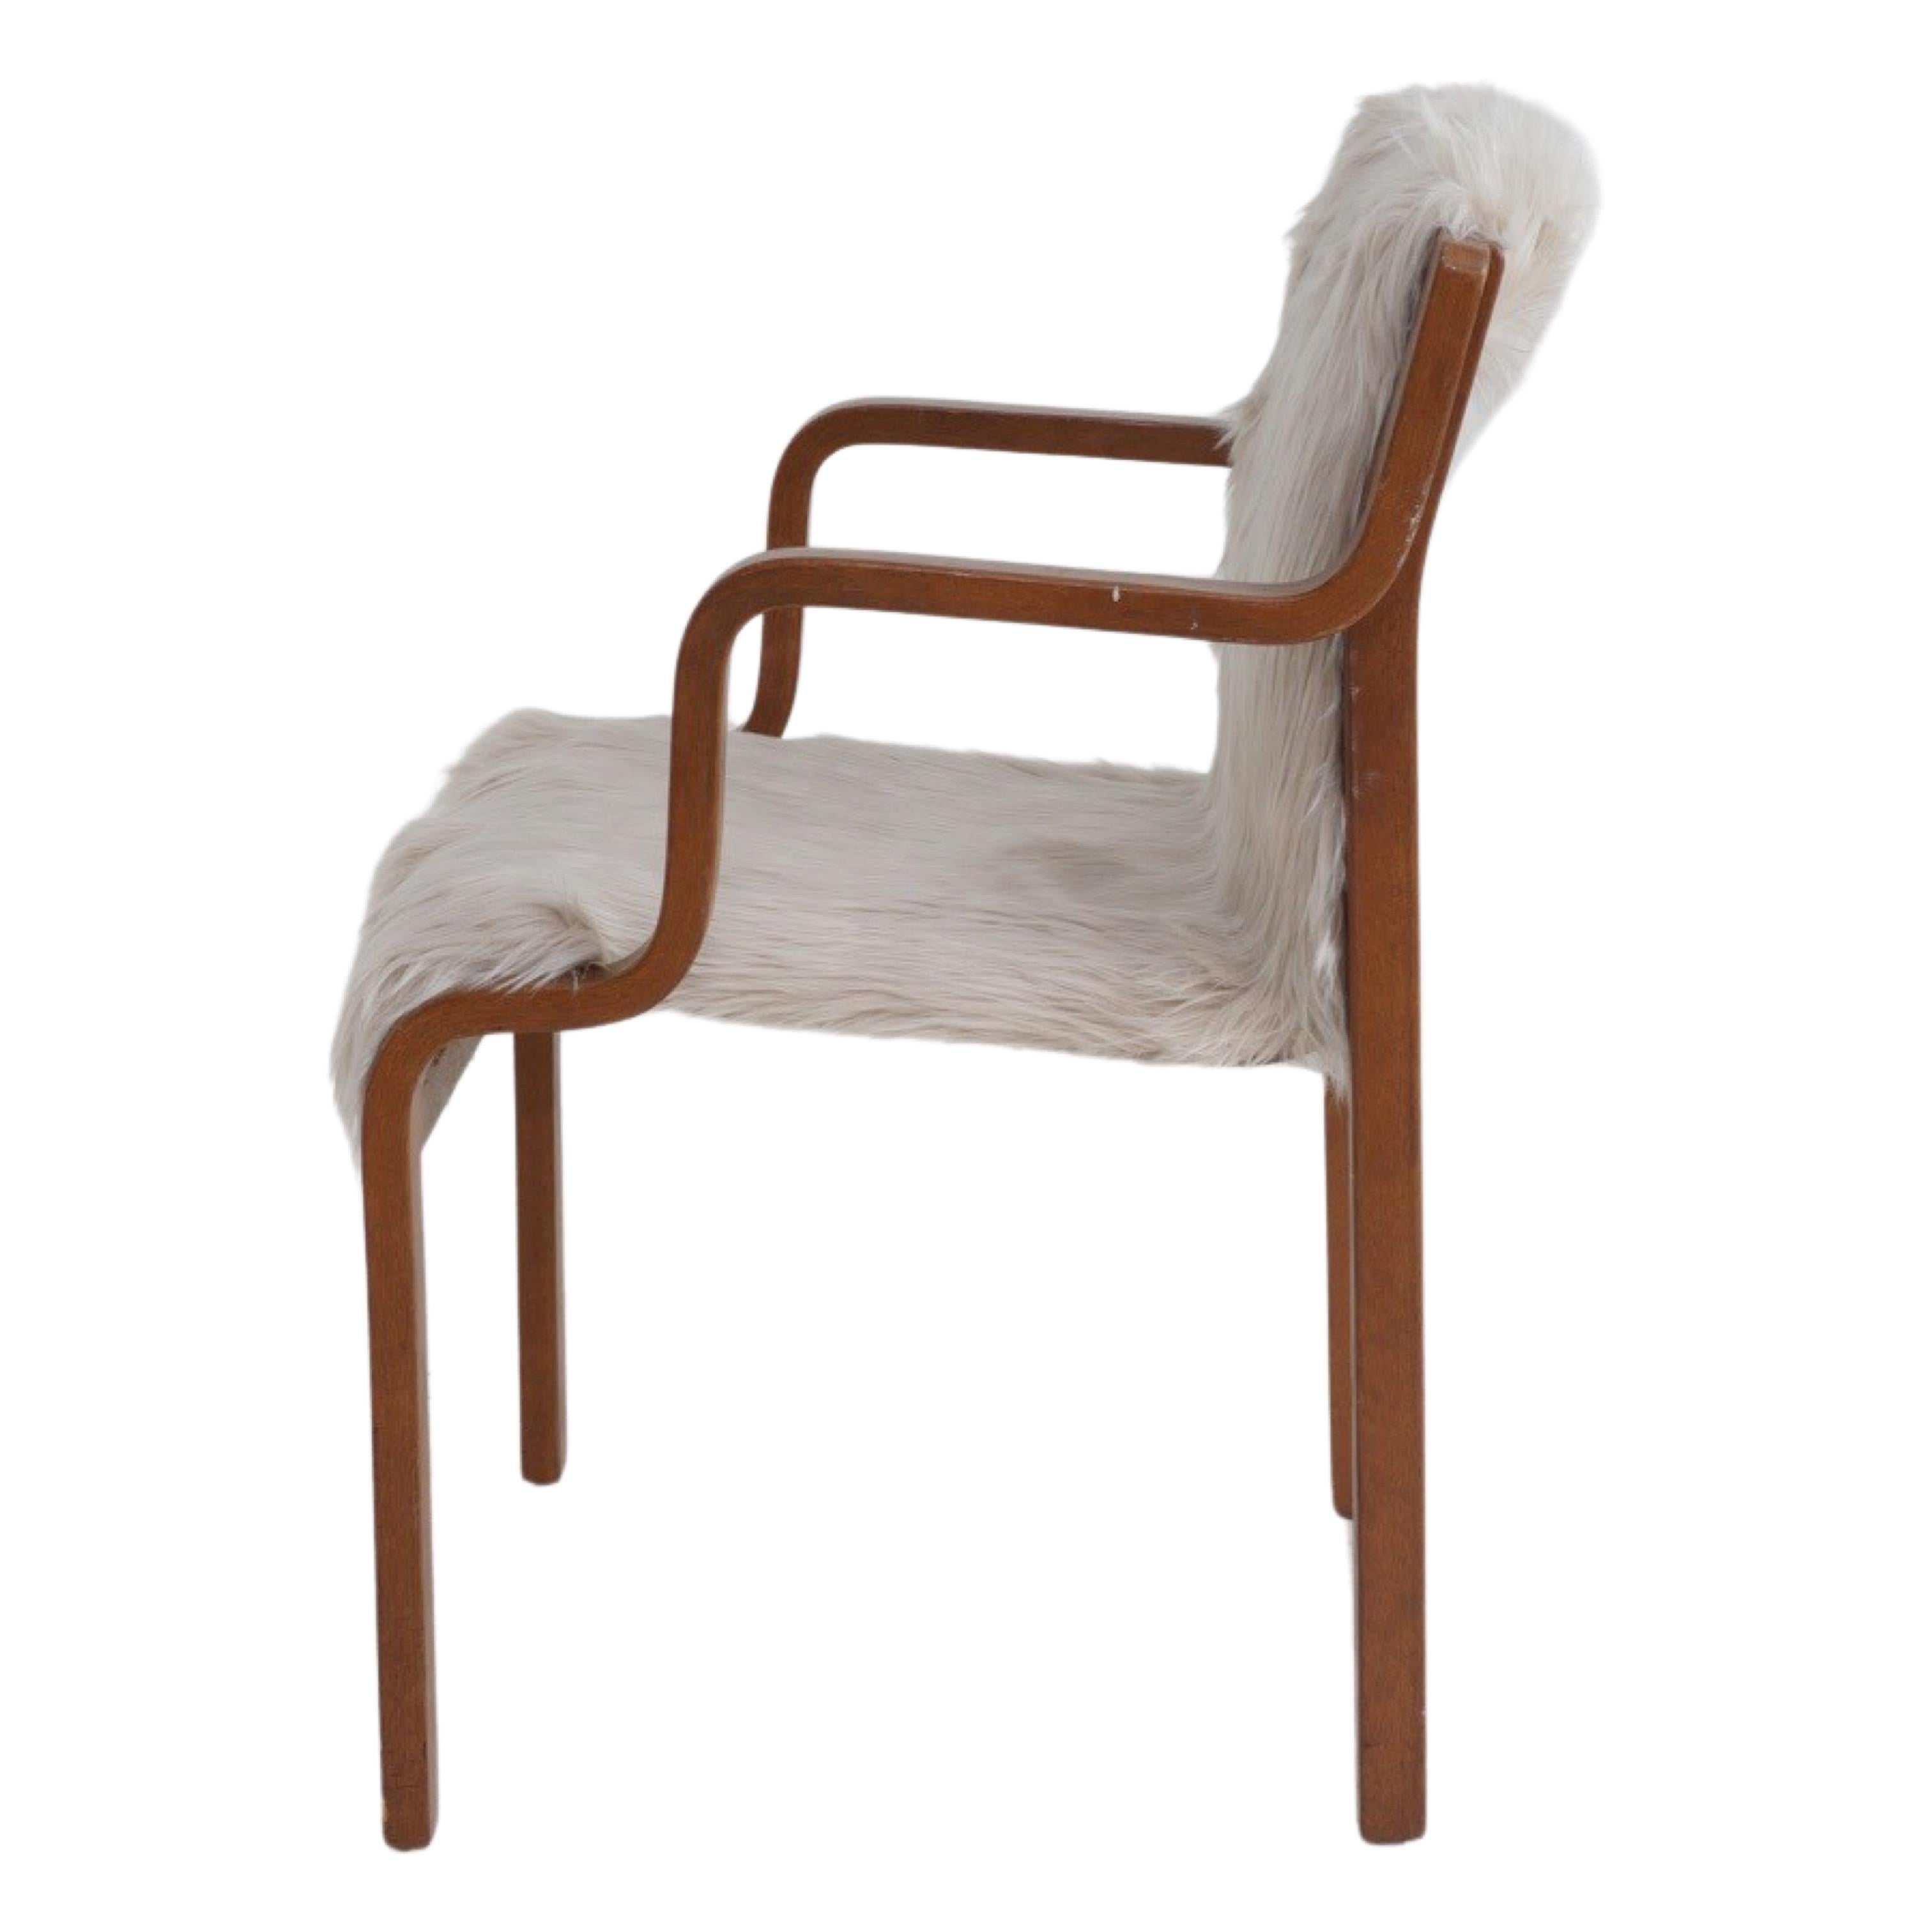 Mid-20th Century Swedish Bentwood Chair by Stendig, 1960s